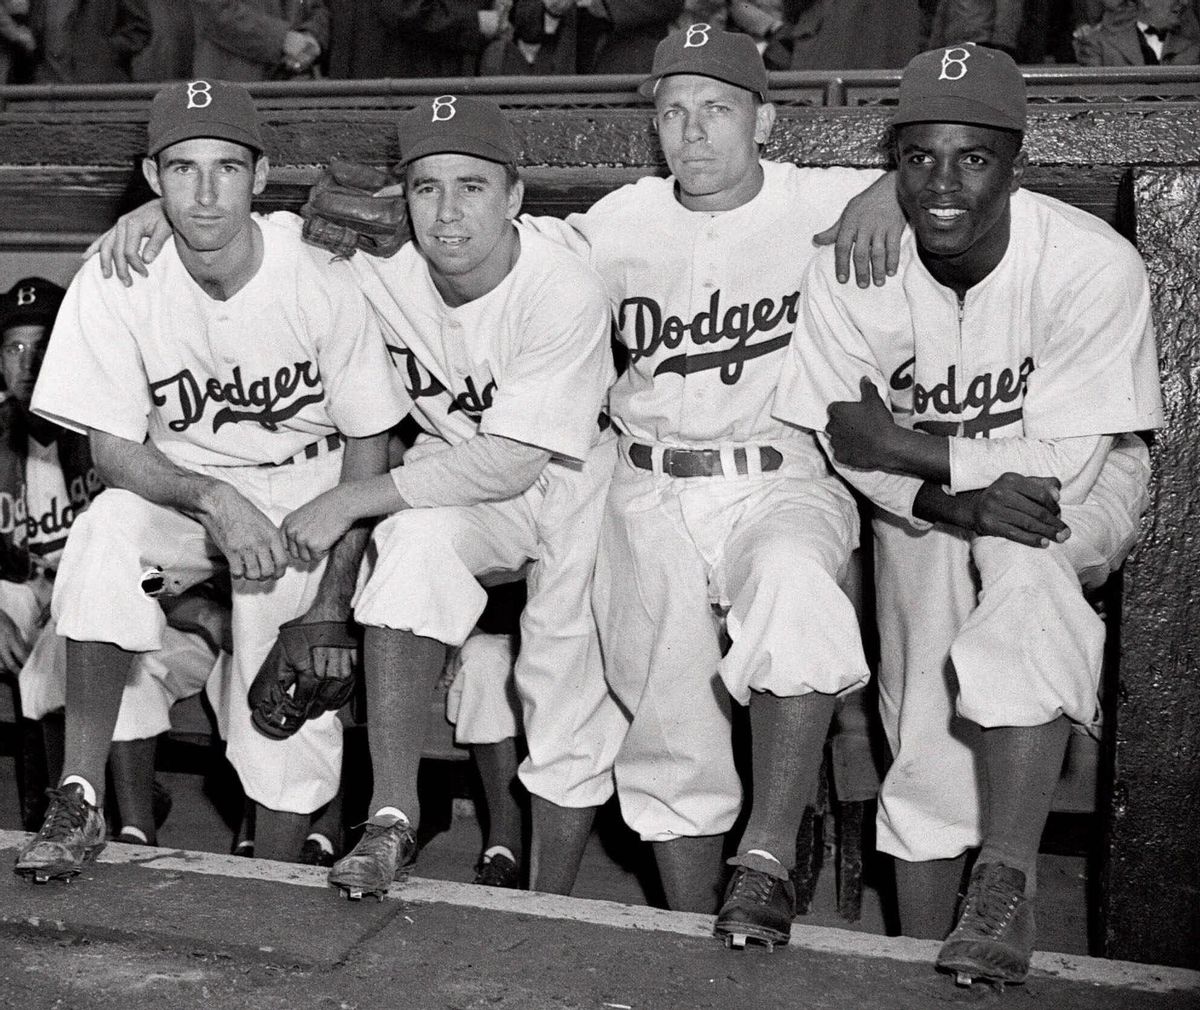 FILE - In this April 15, 1947, file photo, from left, Brooklyn Dodgers baseball players John Jorgensen, Pee Wee Reese, Ed Stanky and Jackie Robinson pose at Ebbets Field in New York. The first statue in Dodger Stadium history belongs to Jackie Robinson. The team will unveil his likeness during Jackie Robinson Day festivities on Saturday, April 15, 2017, with his wife and extended family in attendance on the 70th anniversary of him breaking baseball's color barrier (AP Photo, File) (AP)